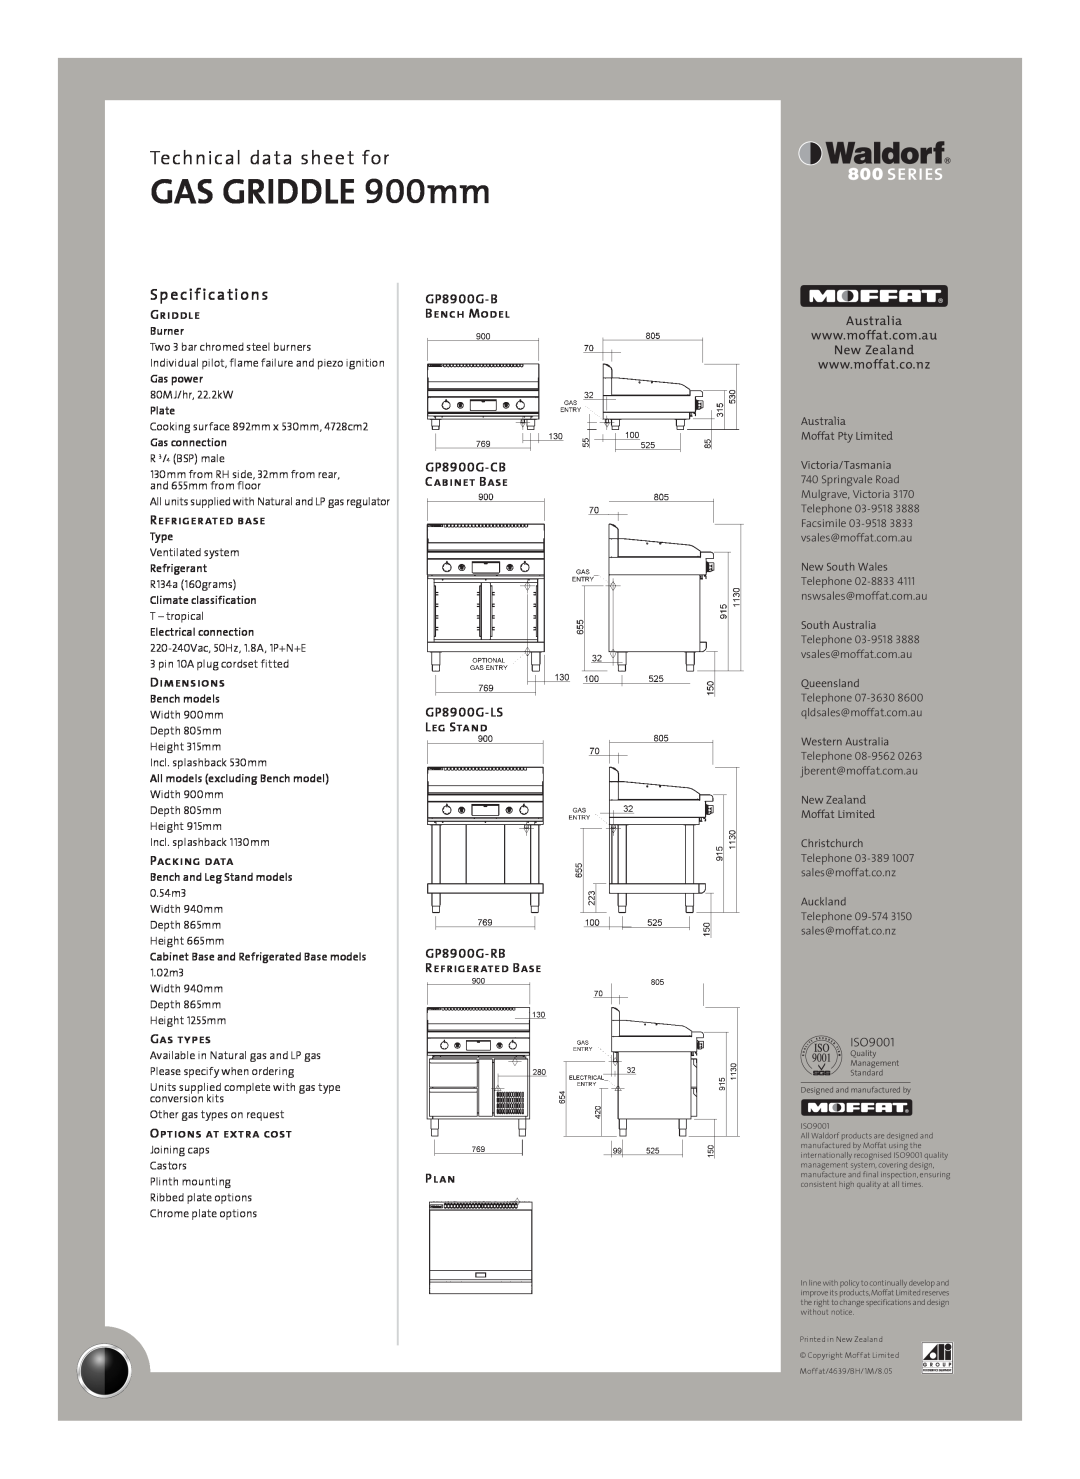 Moffat GP8900G-B Sp e cif ications, GAS GRIDDLE 900mm, Technical data sheet for, Griddle, Refrigerated base, Dimensions 